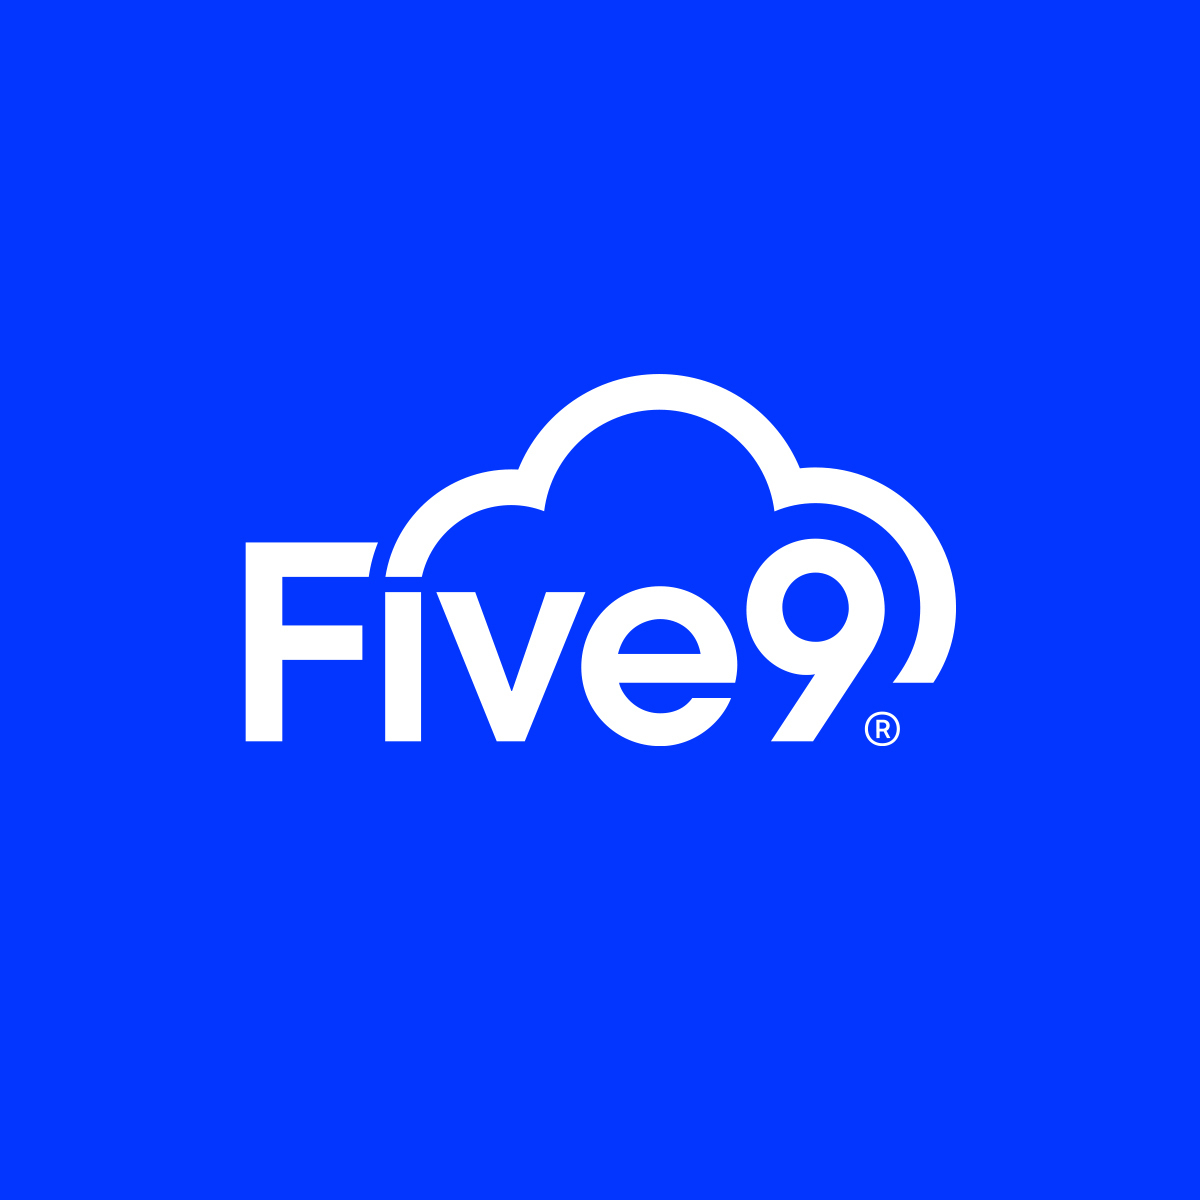 #Five9 closed 2023 with strong growth & continued business momentum leading into 2024. Our commitment to product innovation, expanding our ecosystem with strategic partners, and global investments strengthened our market standing. Read more. #PressRelease spr.ly/6016bFGTy